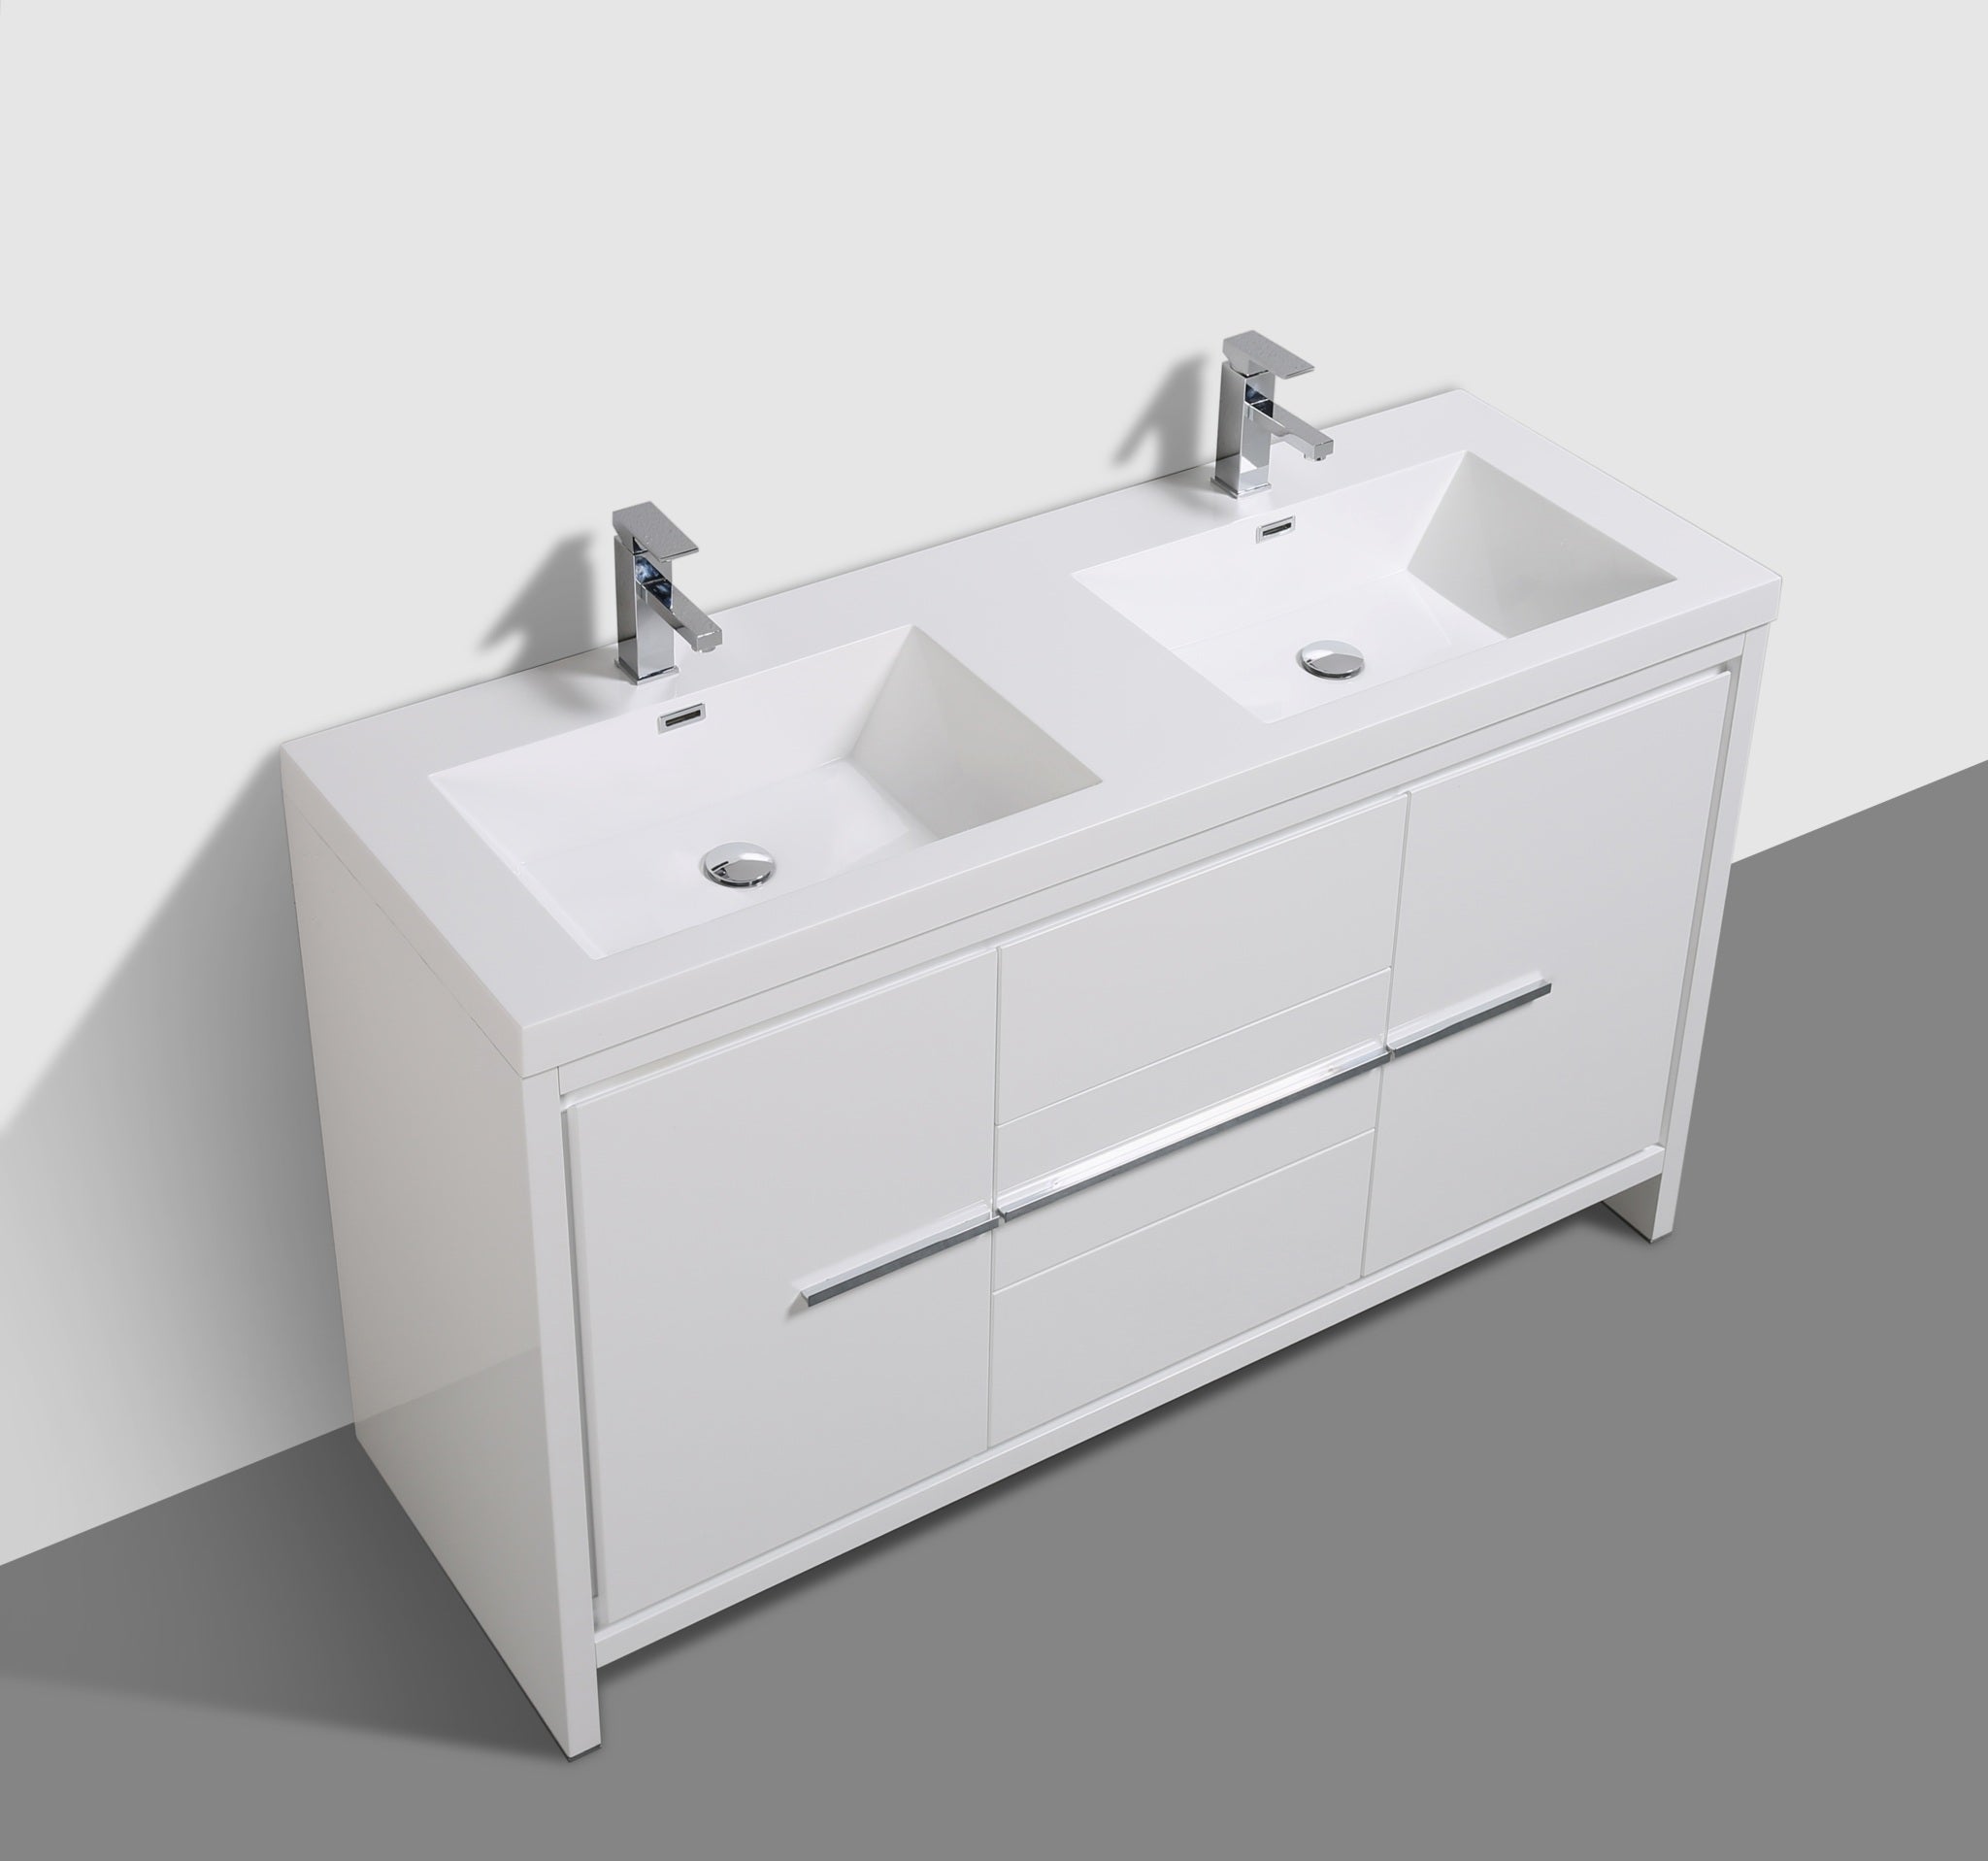 Granada 59 White High Gloss With Chrome Handle Cabinet, Square Cultured Marble Double Sink, Free Standing Modern Vanity Set